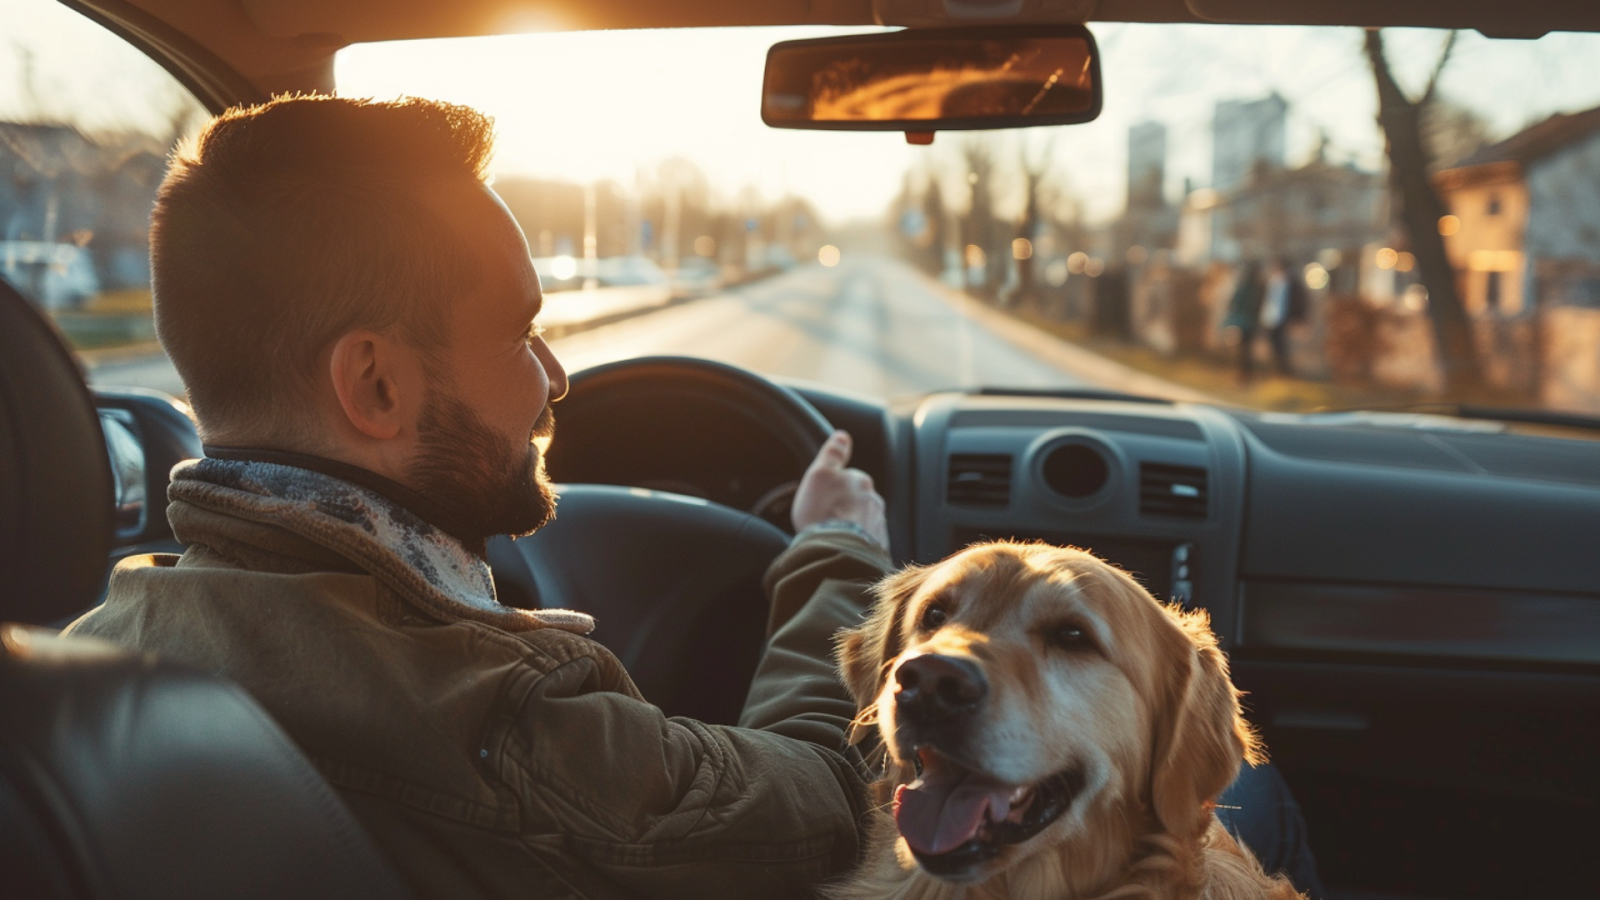 A man and his dog inside a car enjoying a scenic drive in Warsaw, Poland